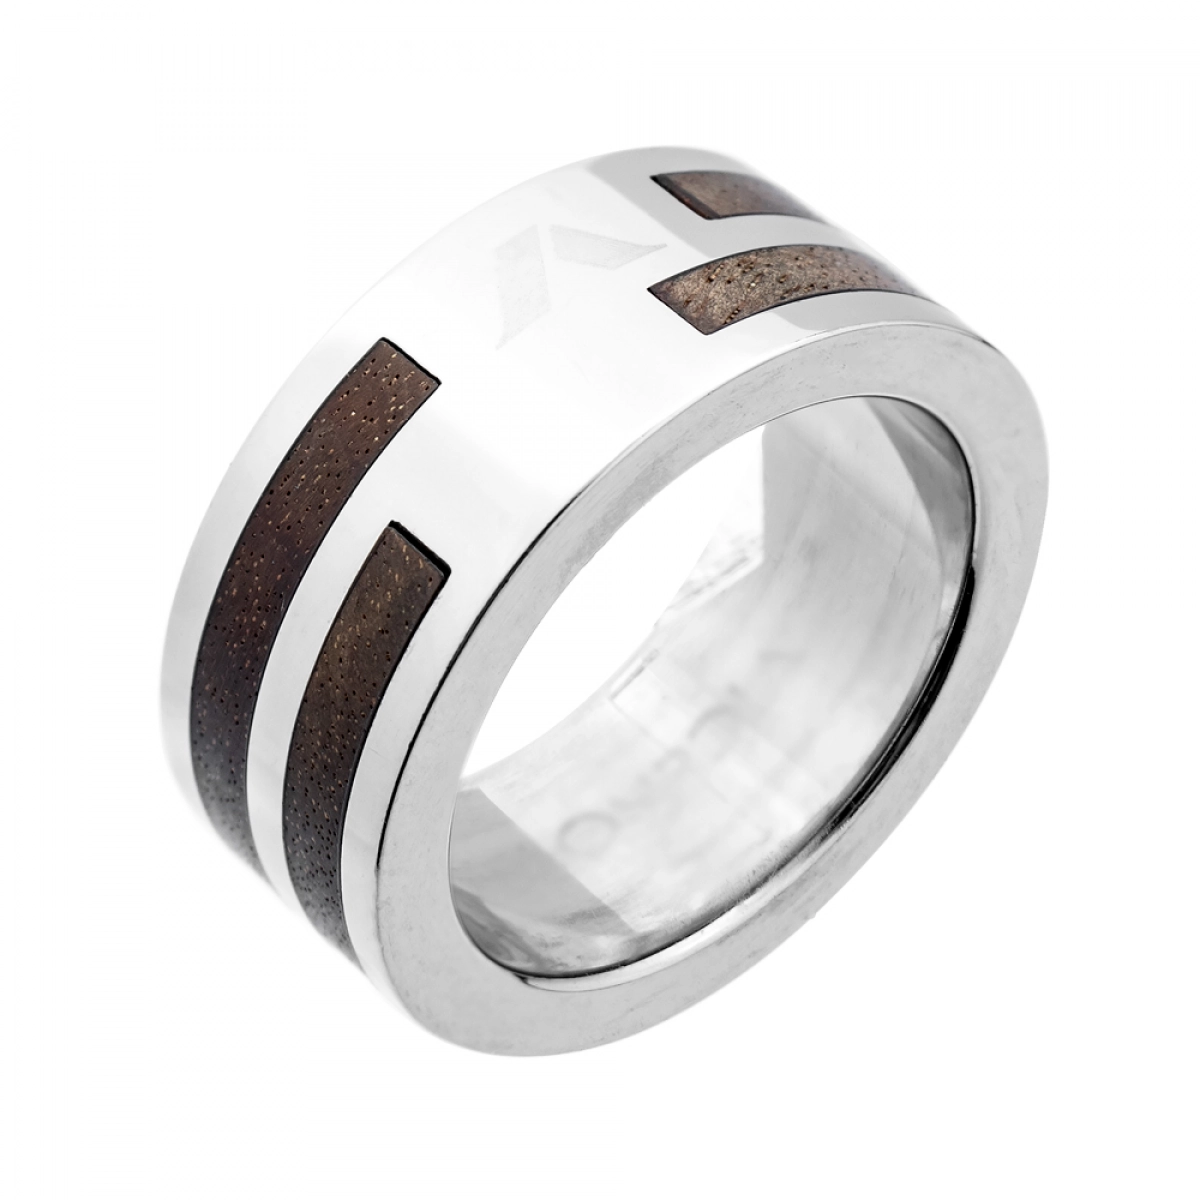 RING UNISEX 7008A01501 Viceroy